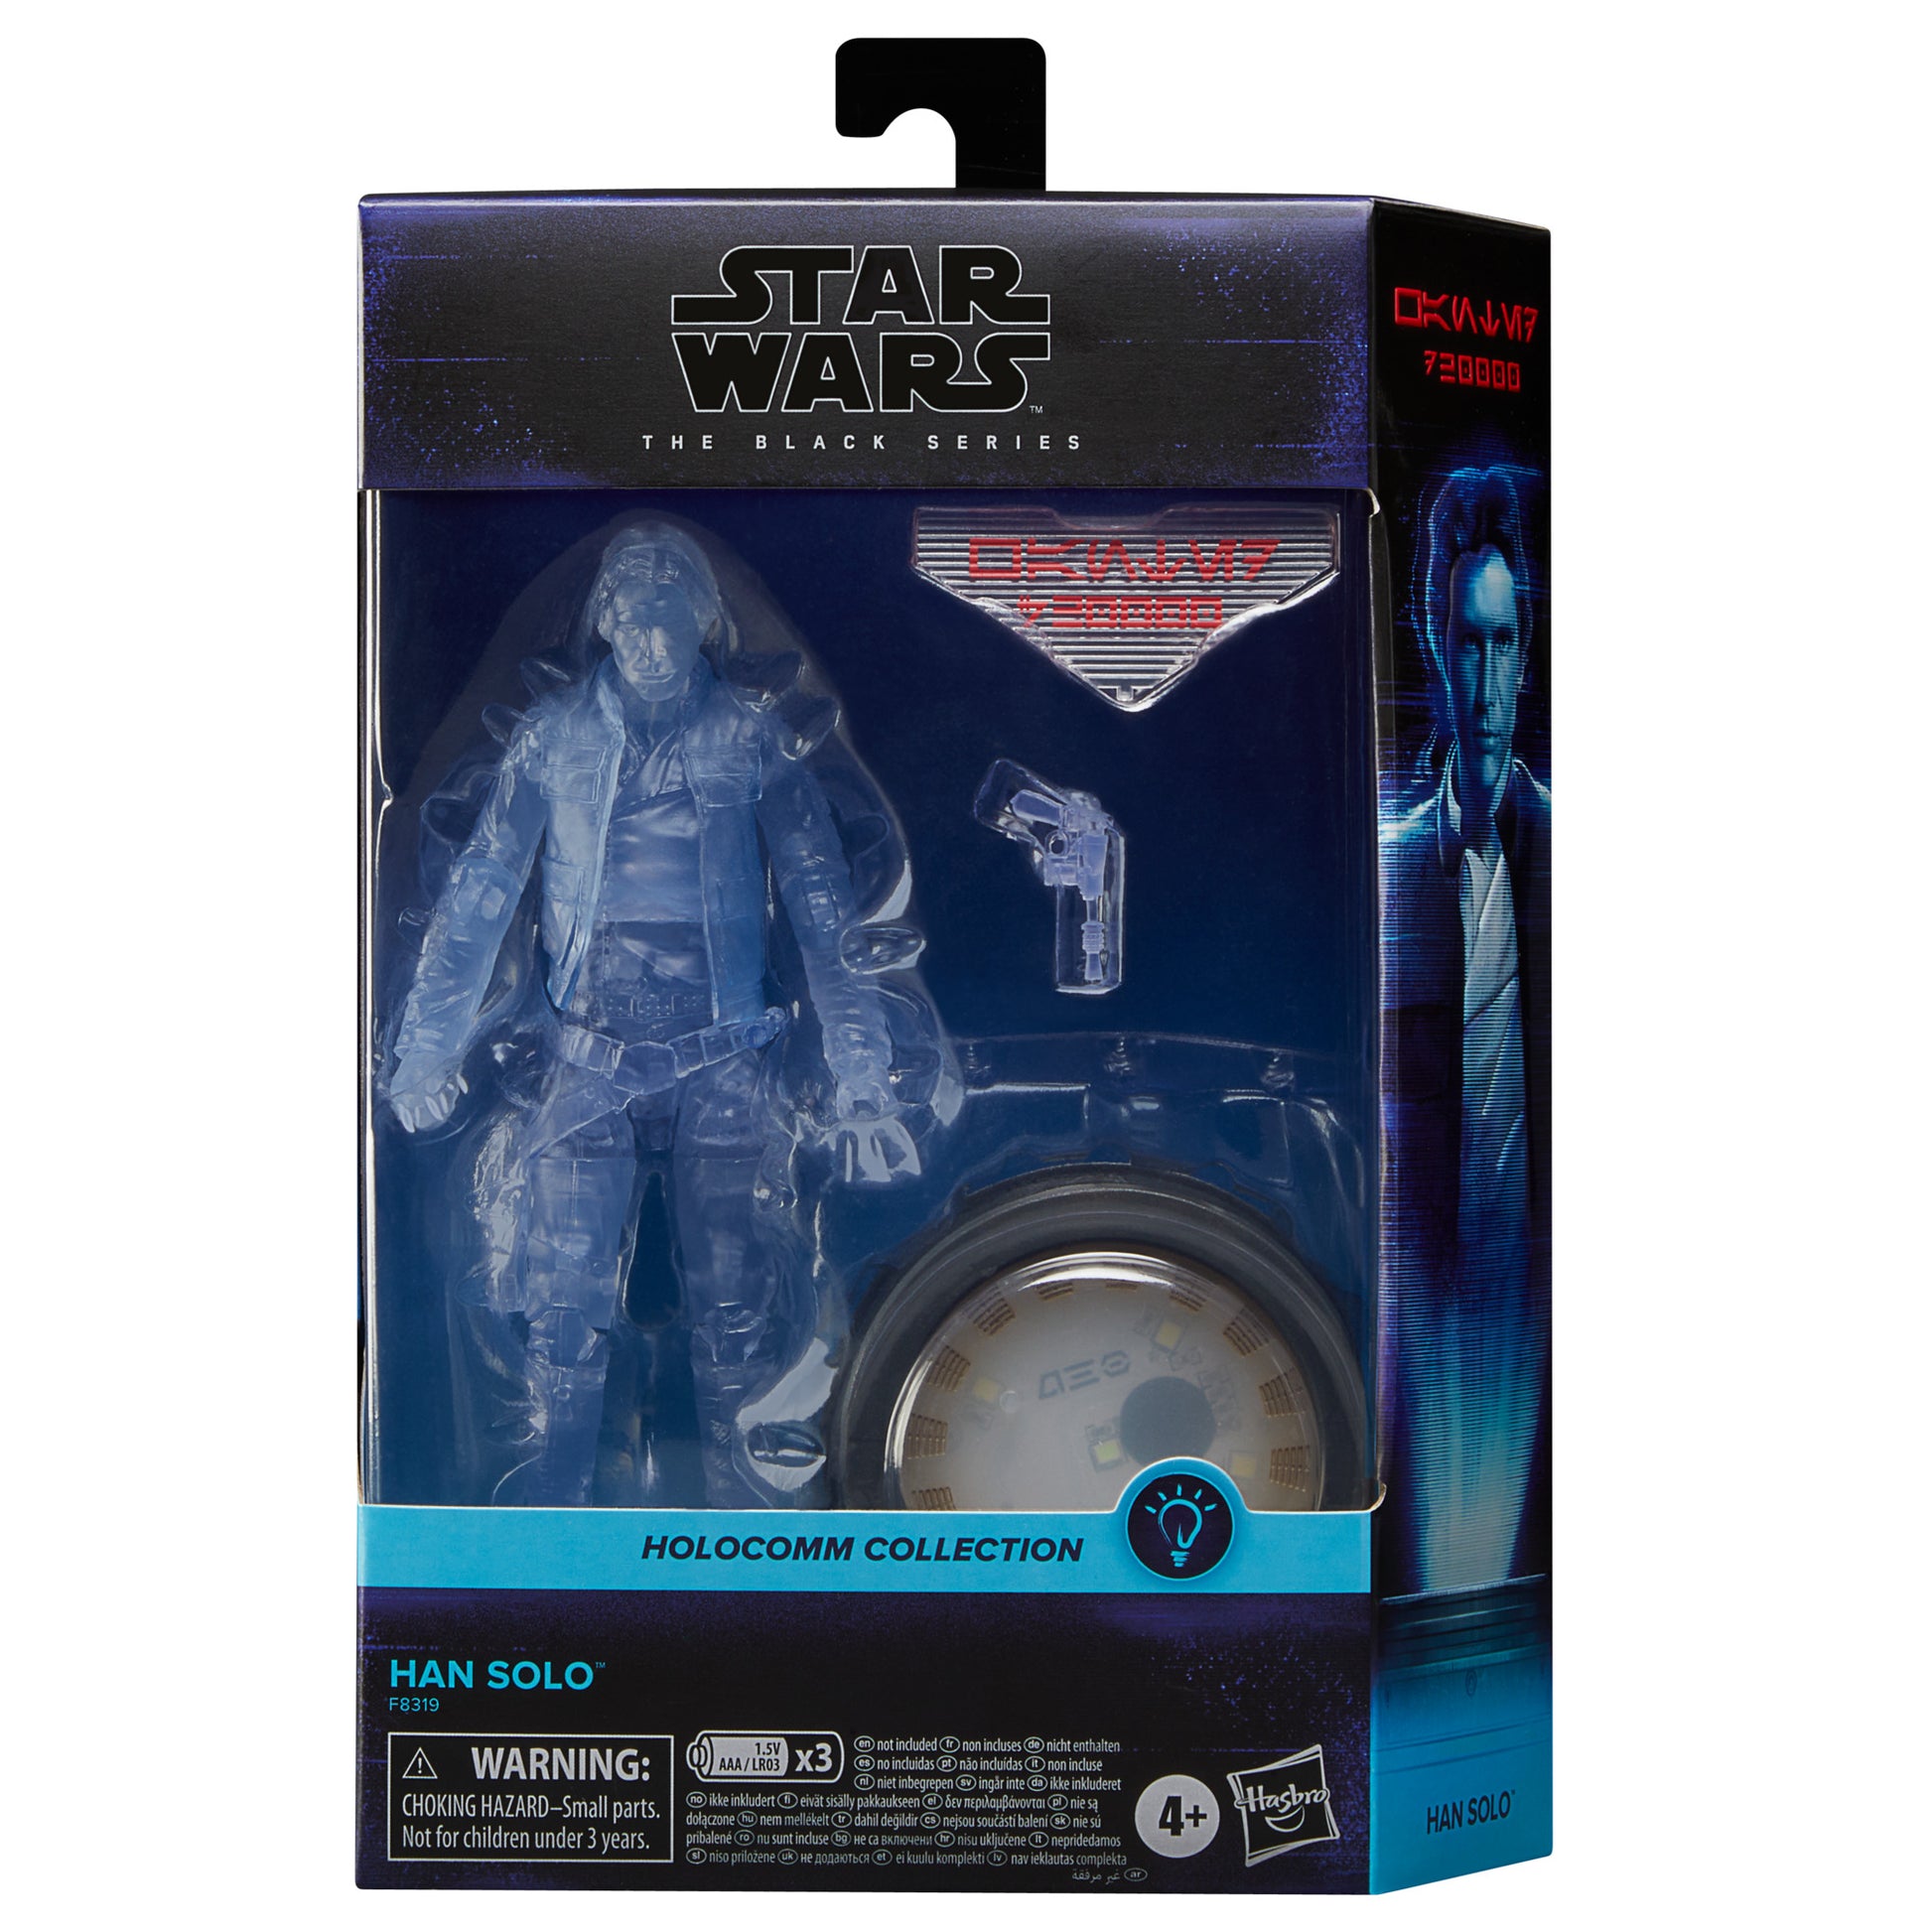 Star Wars The Black Series Holocomm Collection Han Solo, Collectible 6 Inch Action Figure with Light-Up Holopuck